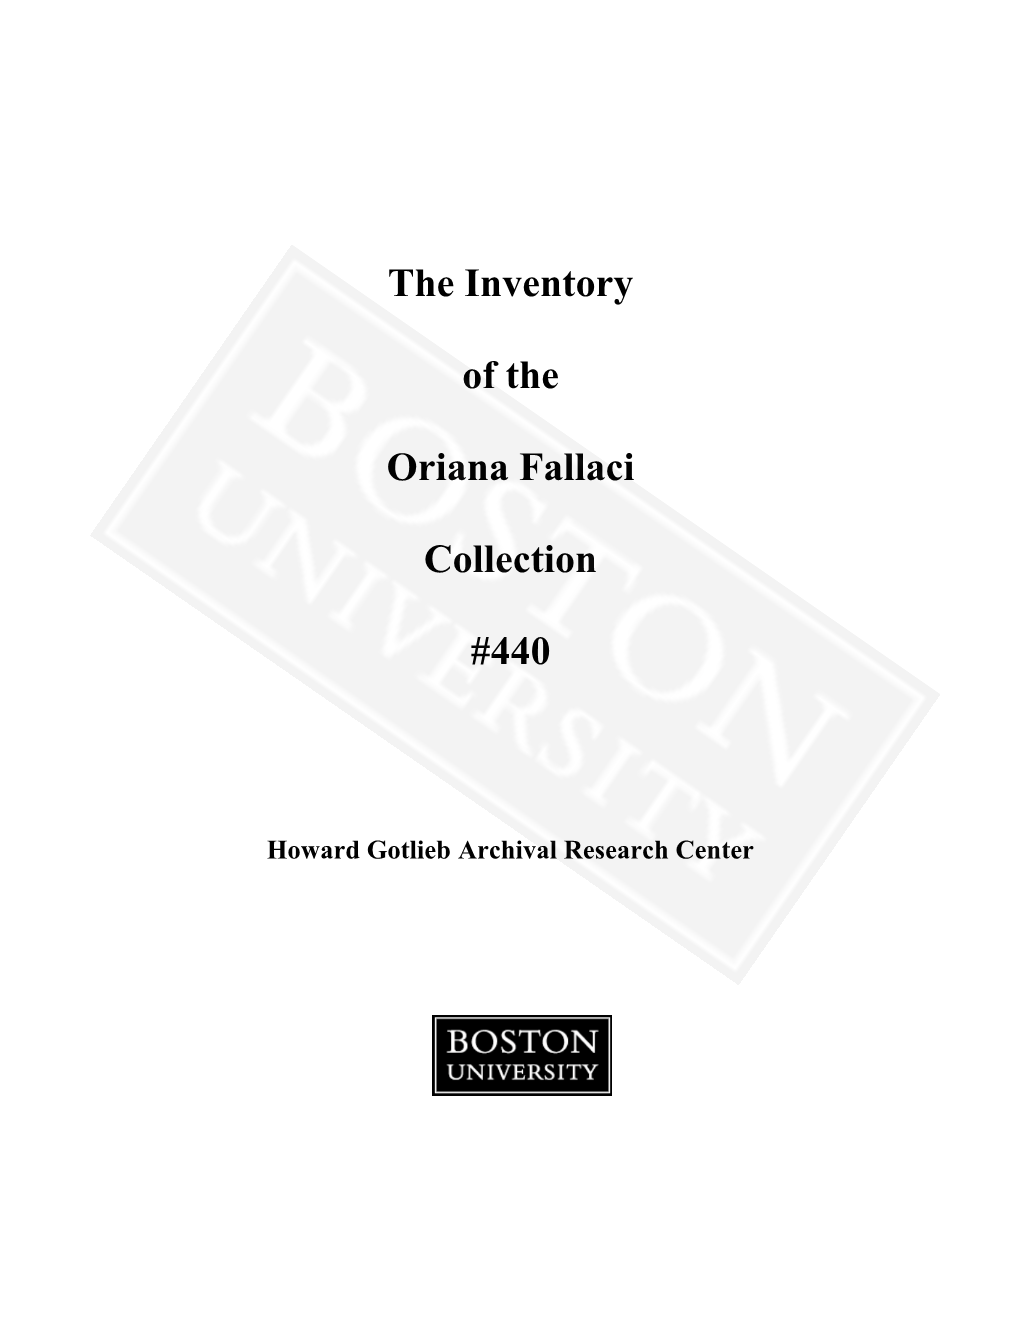 The Inventory of the Oriana Fallaci Collection #440